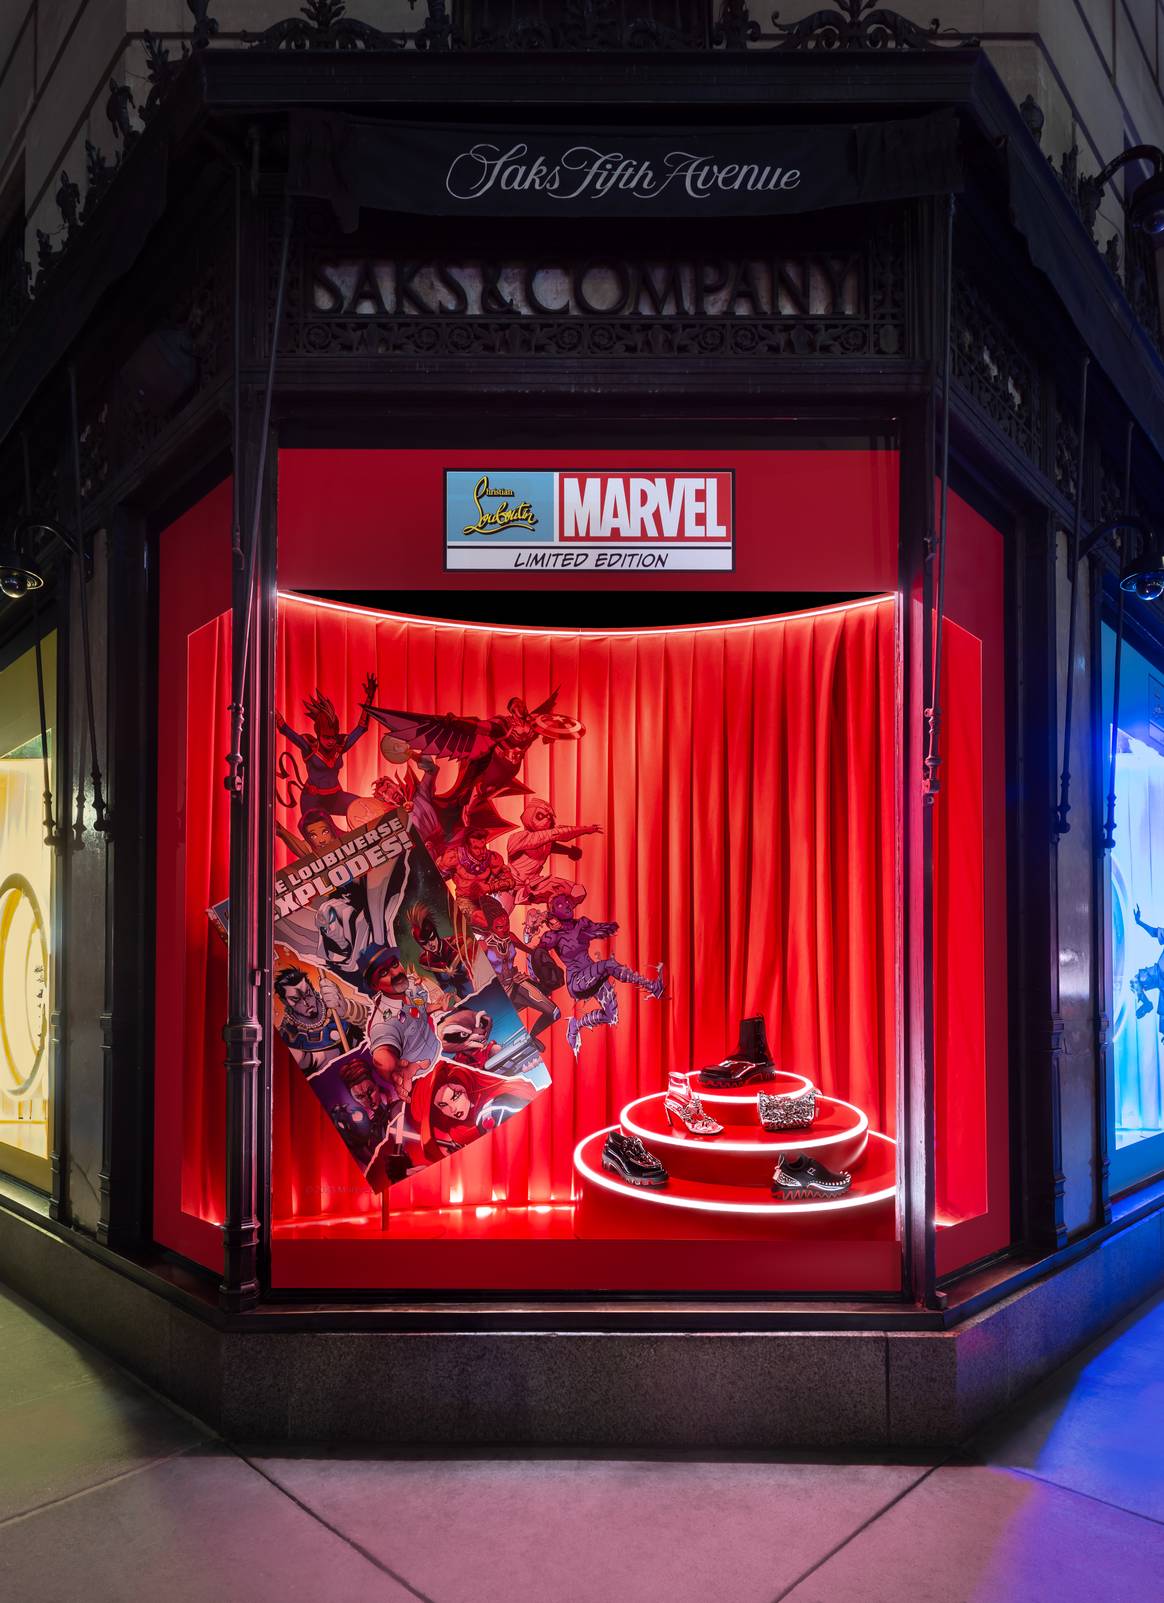 Save The Style Universe in Christian Louboutin's Marvel Collection